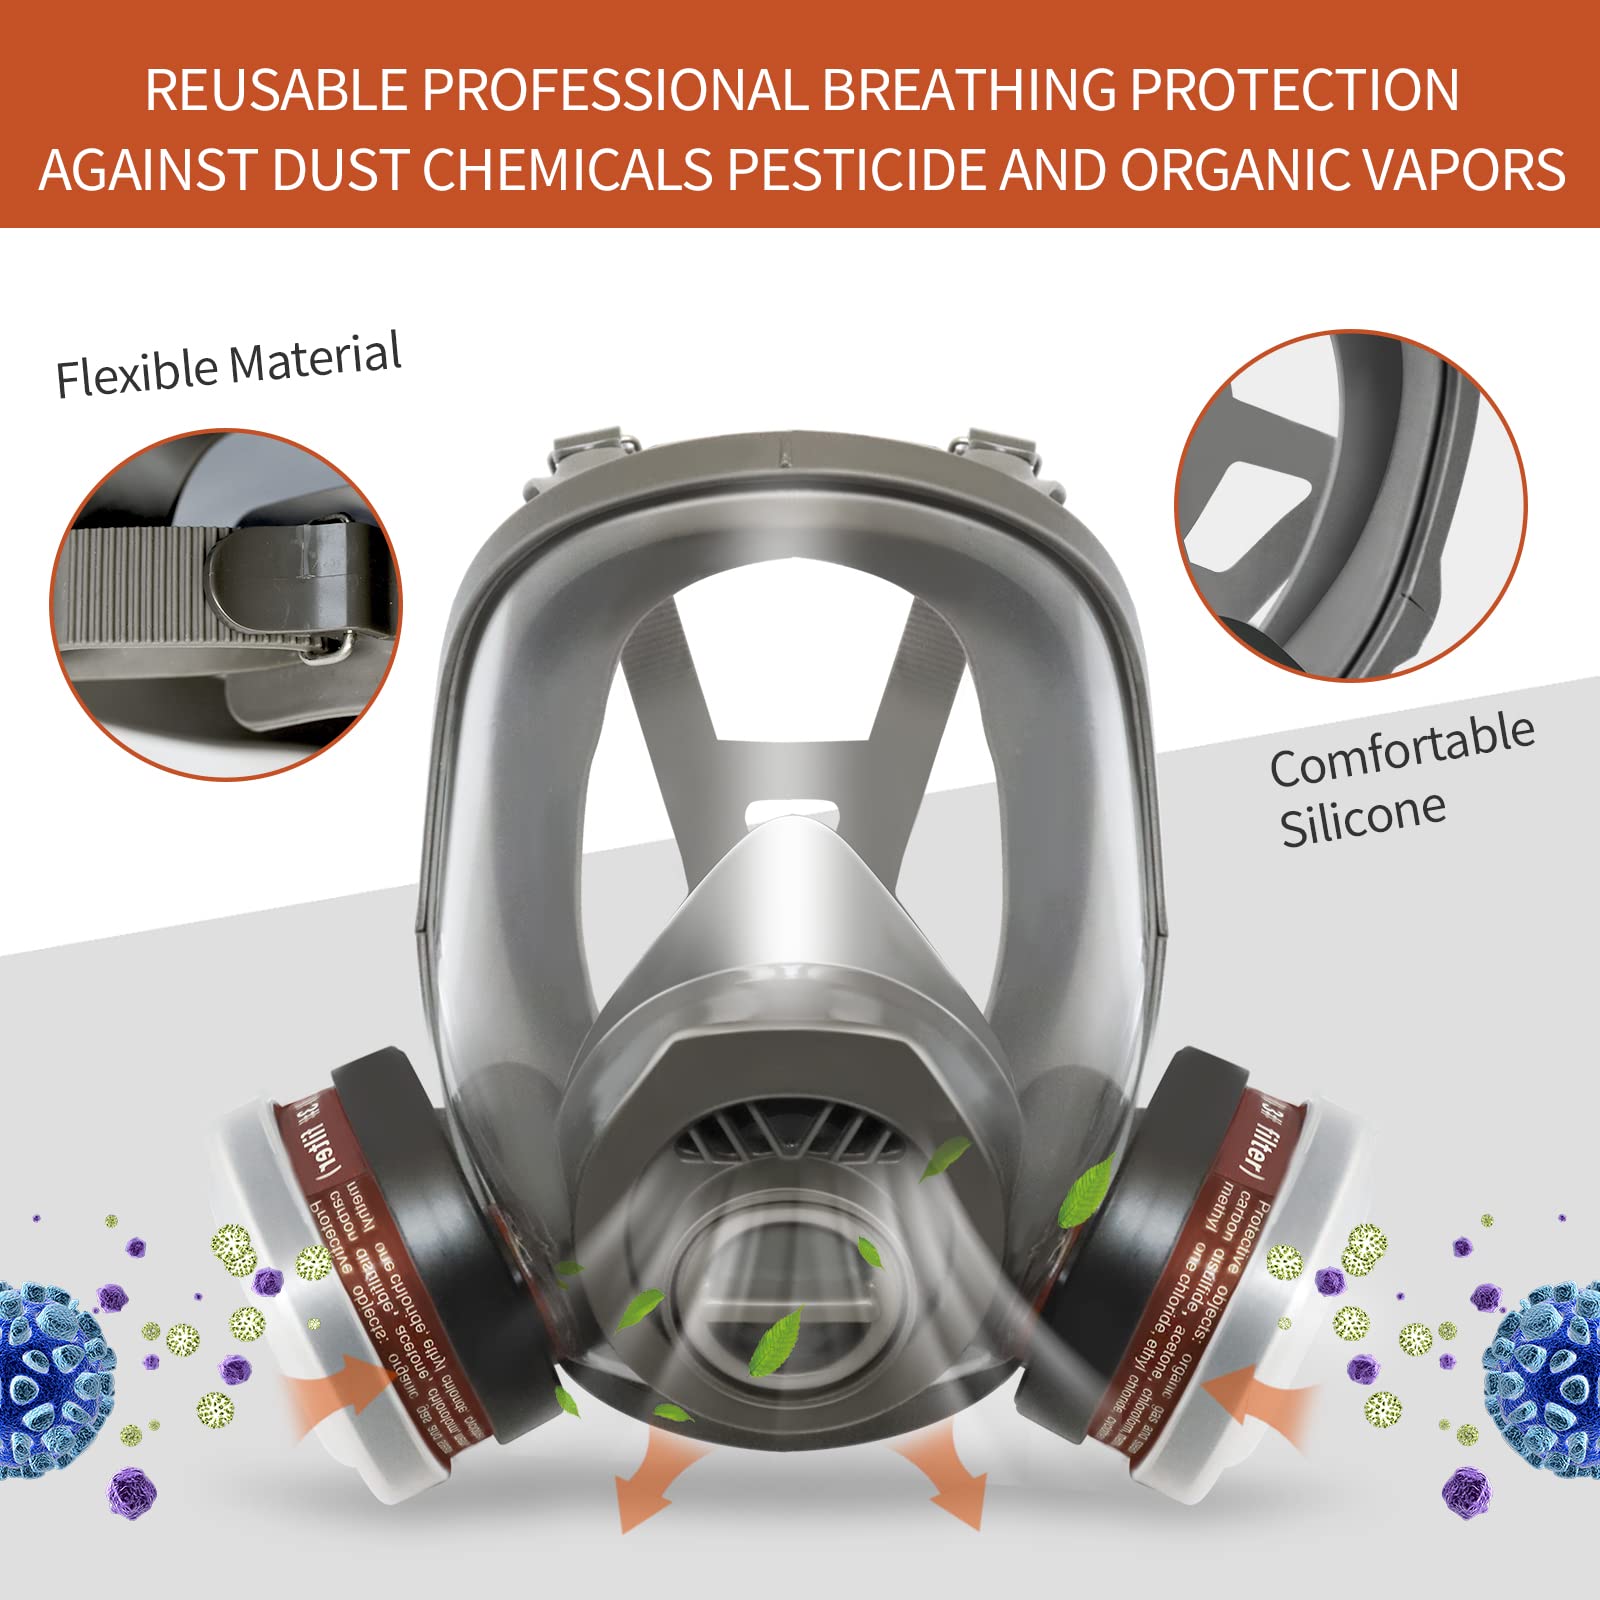 XINBTK Reusable Full Face Respirator Mask - with P-A-1 Organic Vapor Cartridge, Gas Mask with 10 PCS Particulate Filter Cottons, Widely Used in Organic Gas, Paint Spary, Chemical, Woodworking